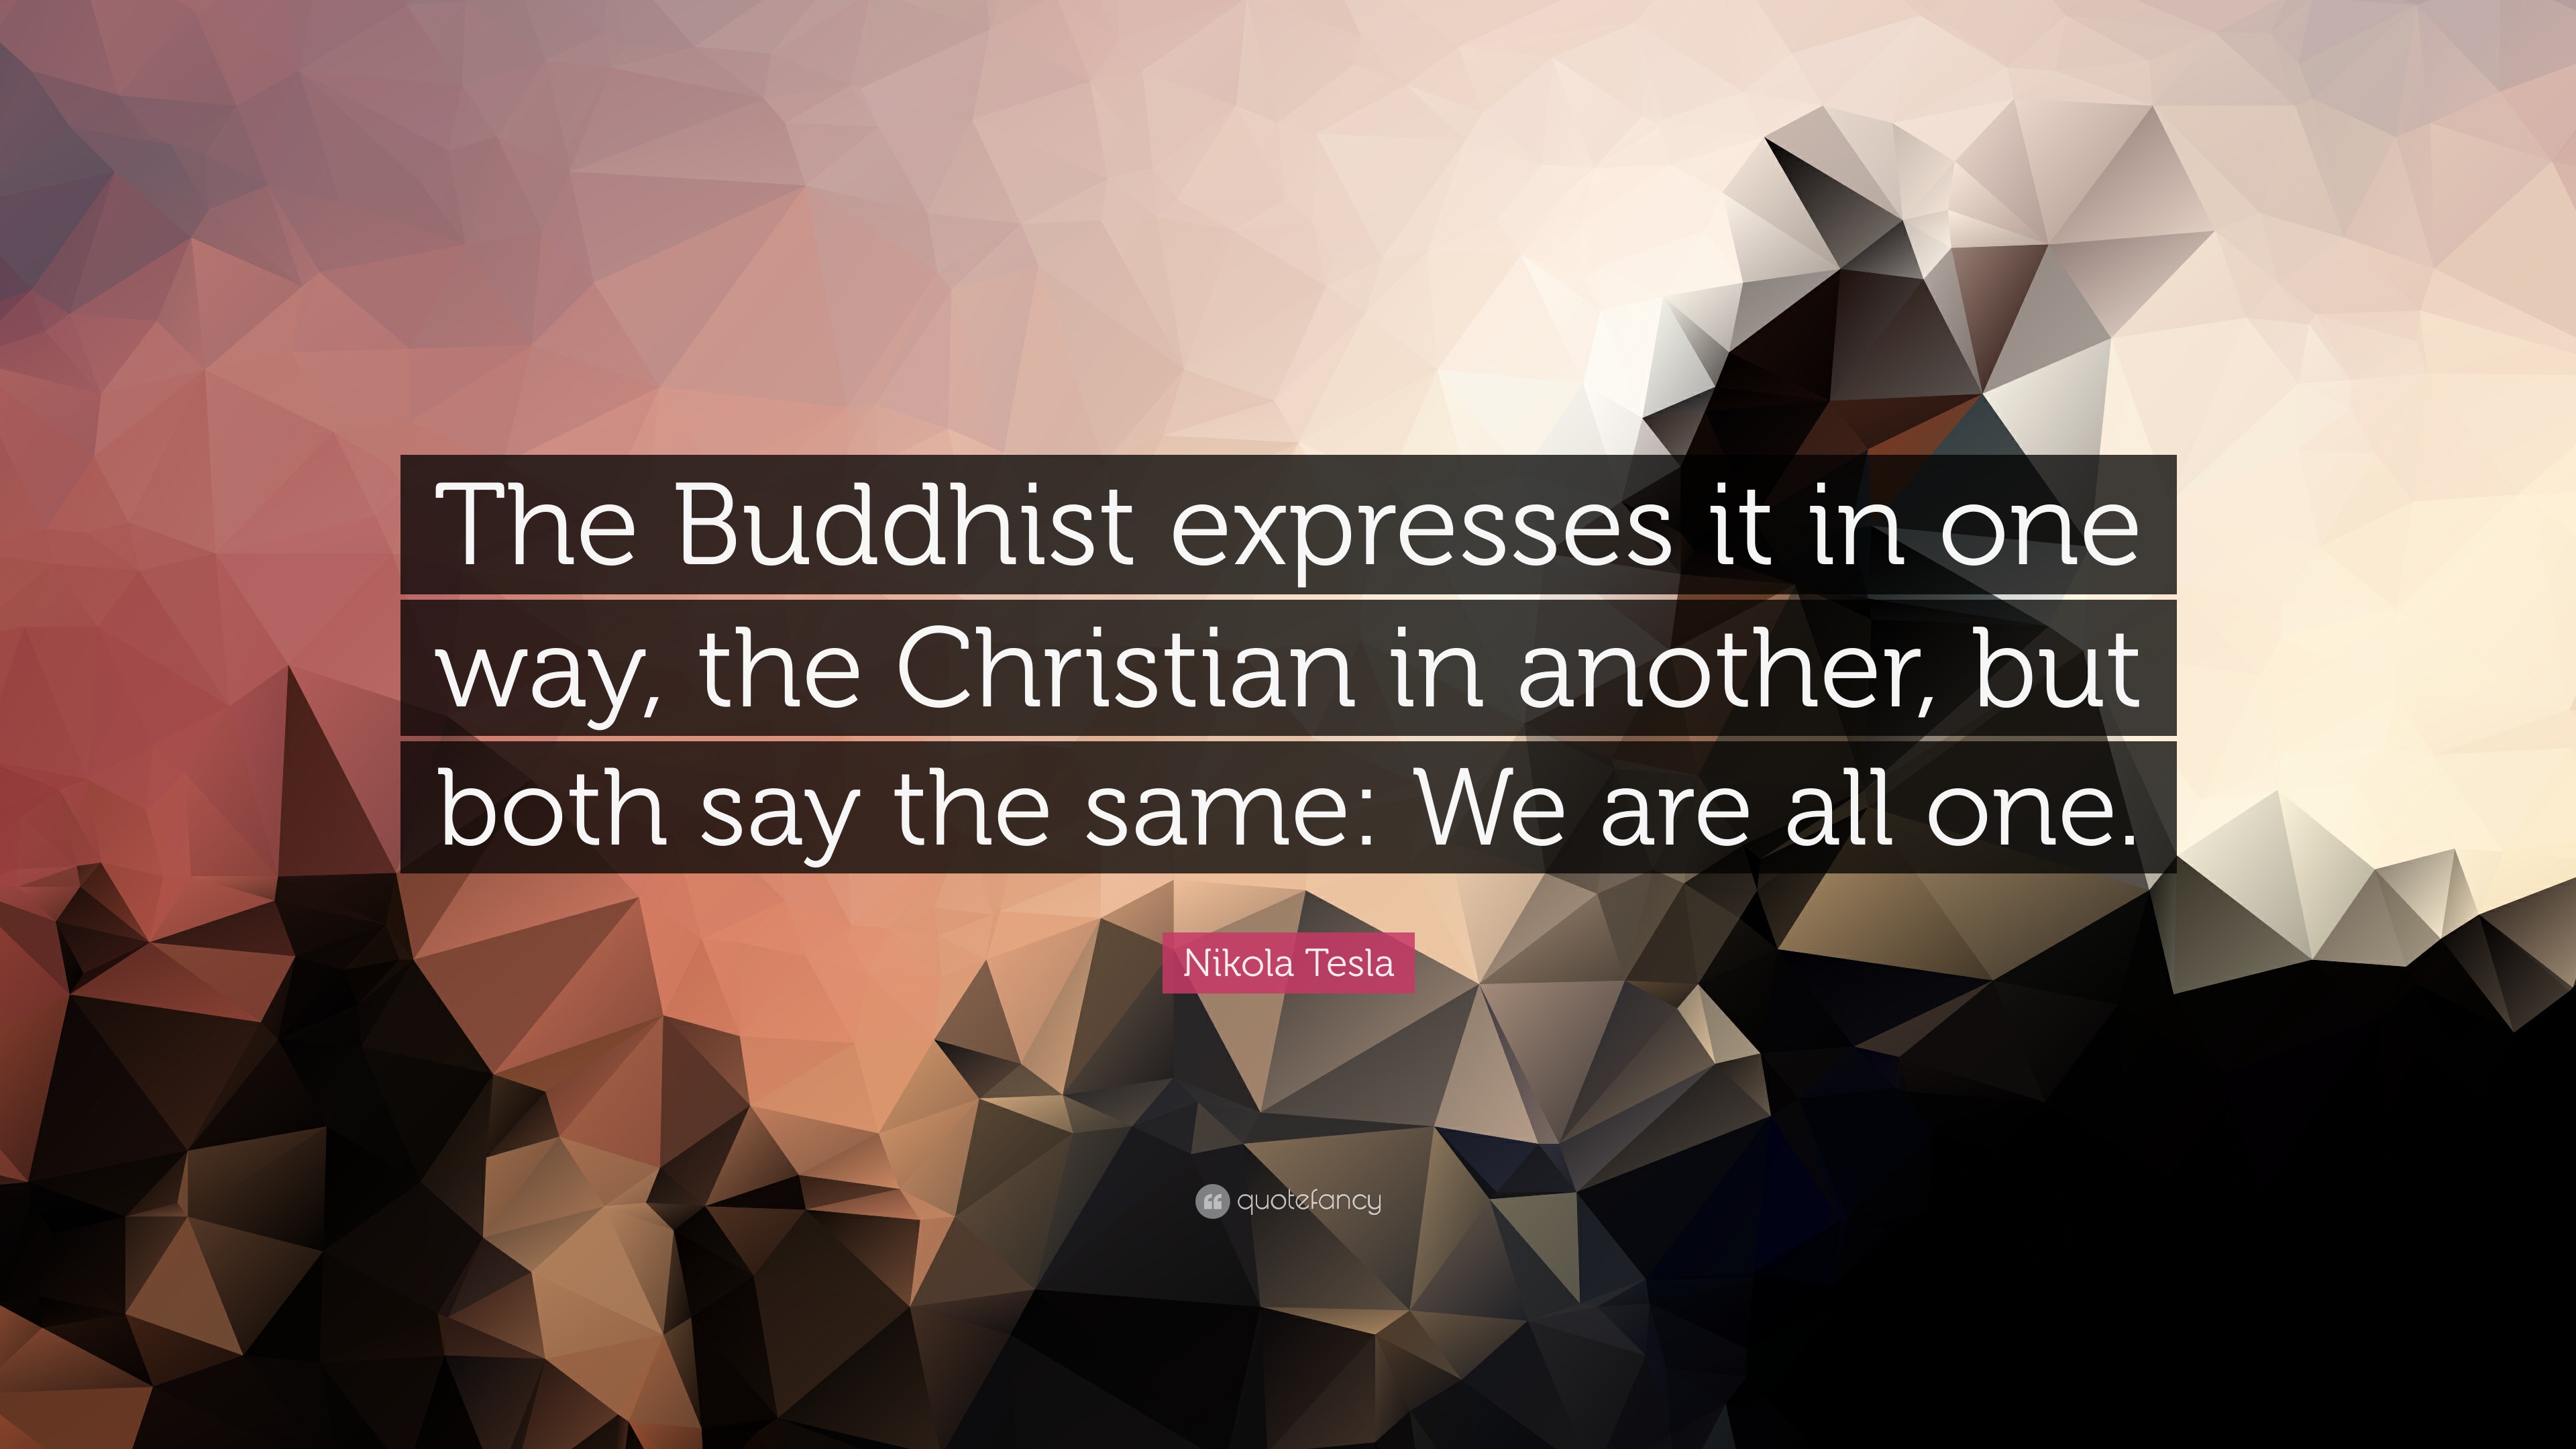 Nikola Tesla Quote: “The Buddhist expresses it in one way, the ...